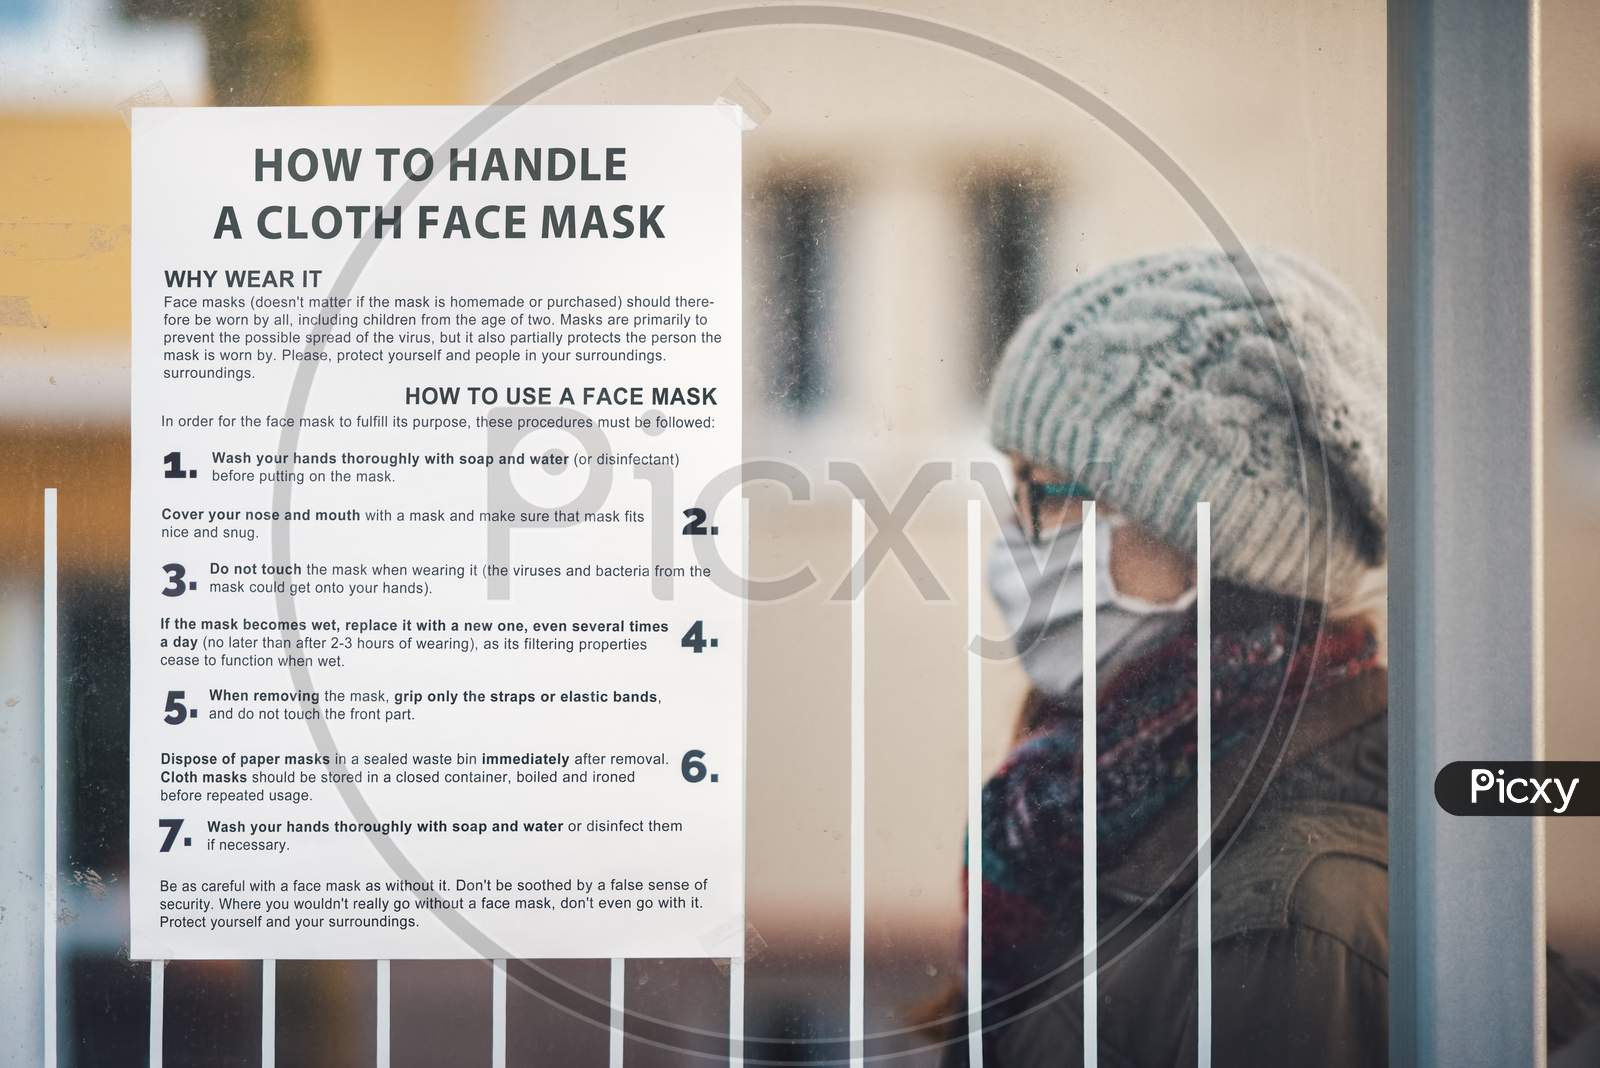 Paper with instructions on how to handle a cloth mask glued at a public transport stop with a woman in the background.